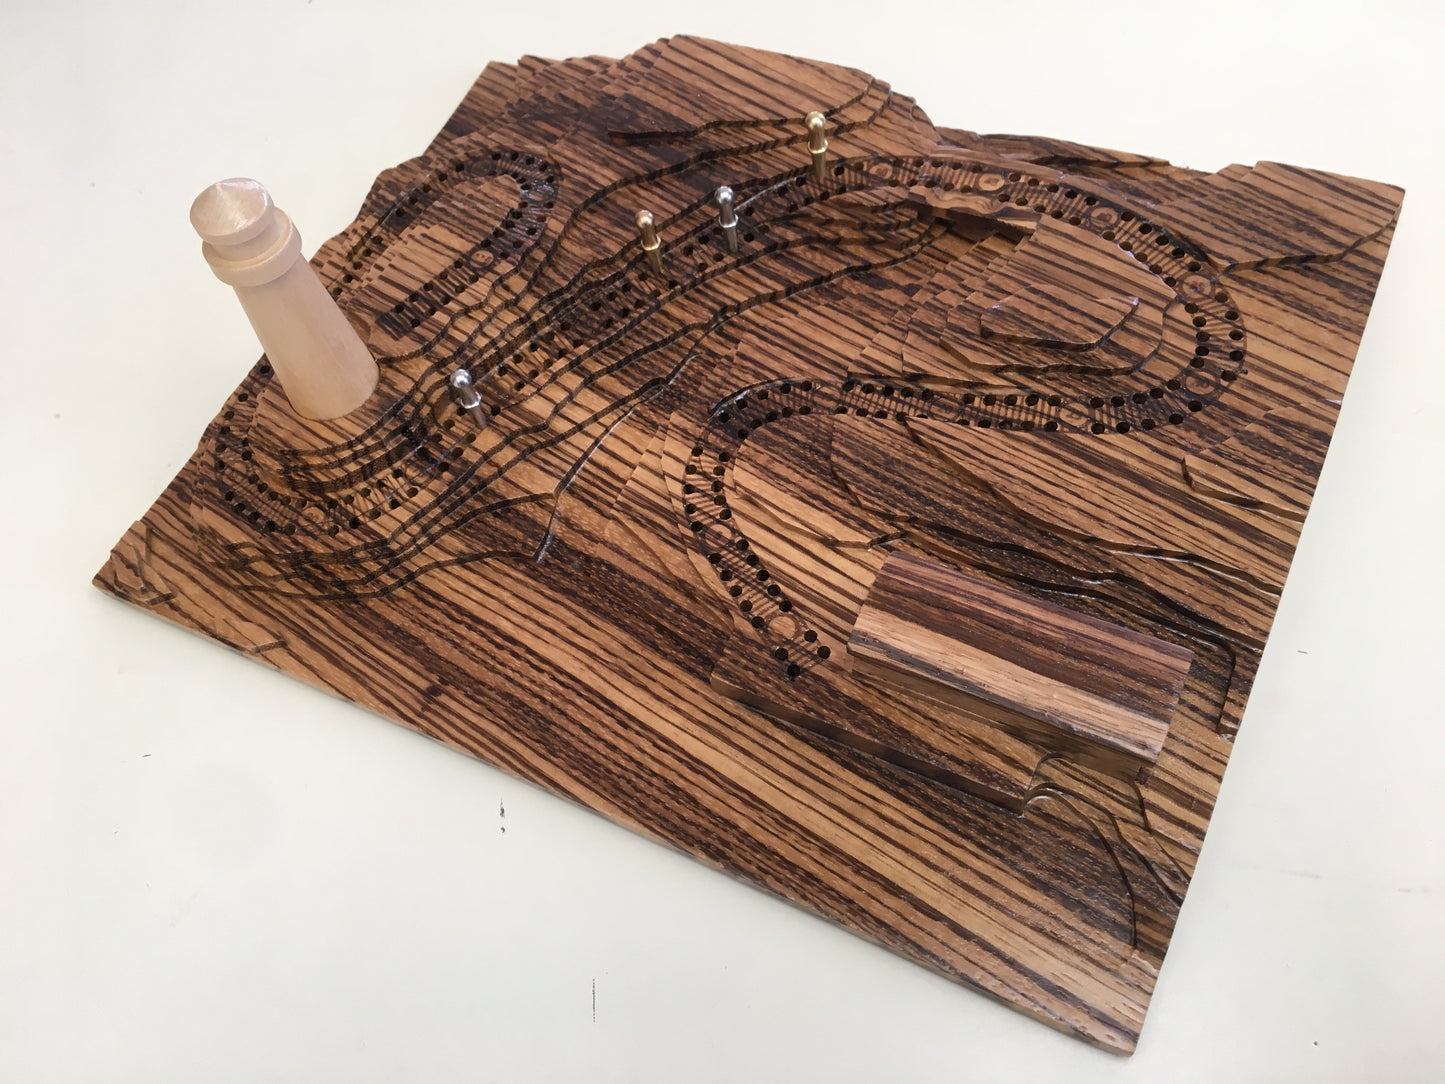 ZebraWood 'Down By The Seashore' Lighthouse Cribscape